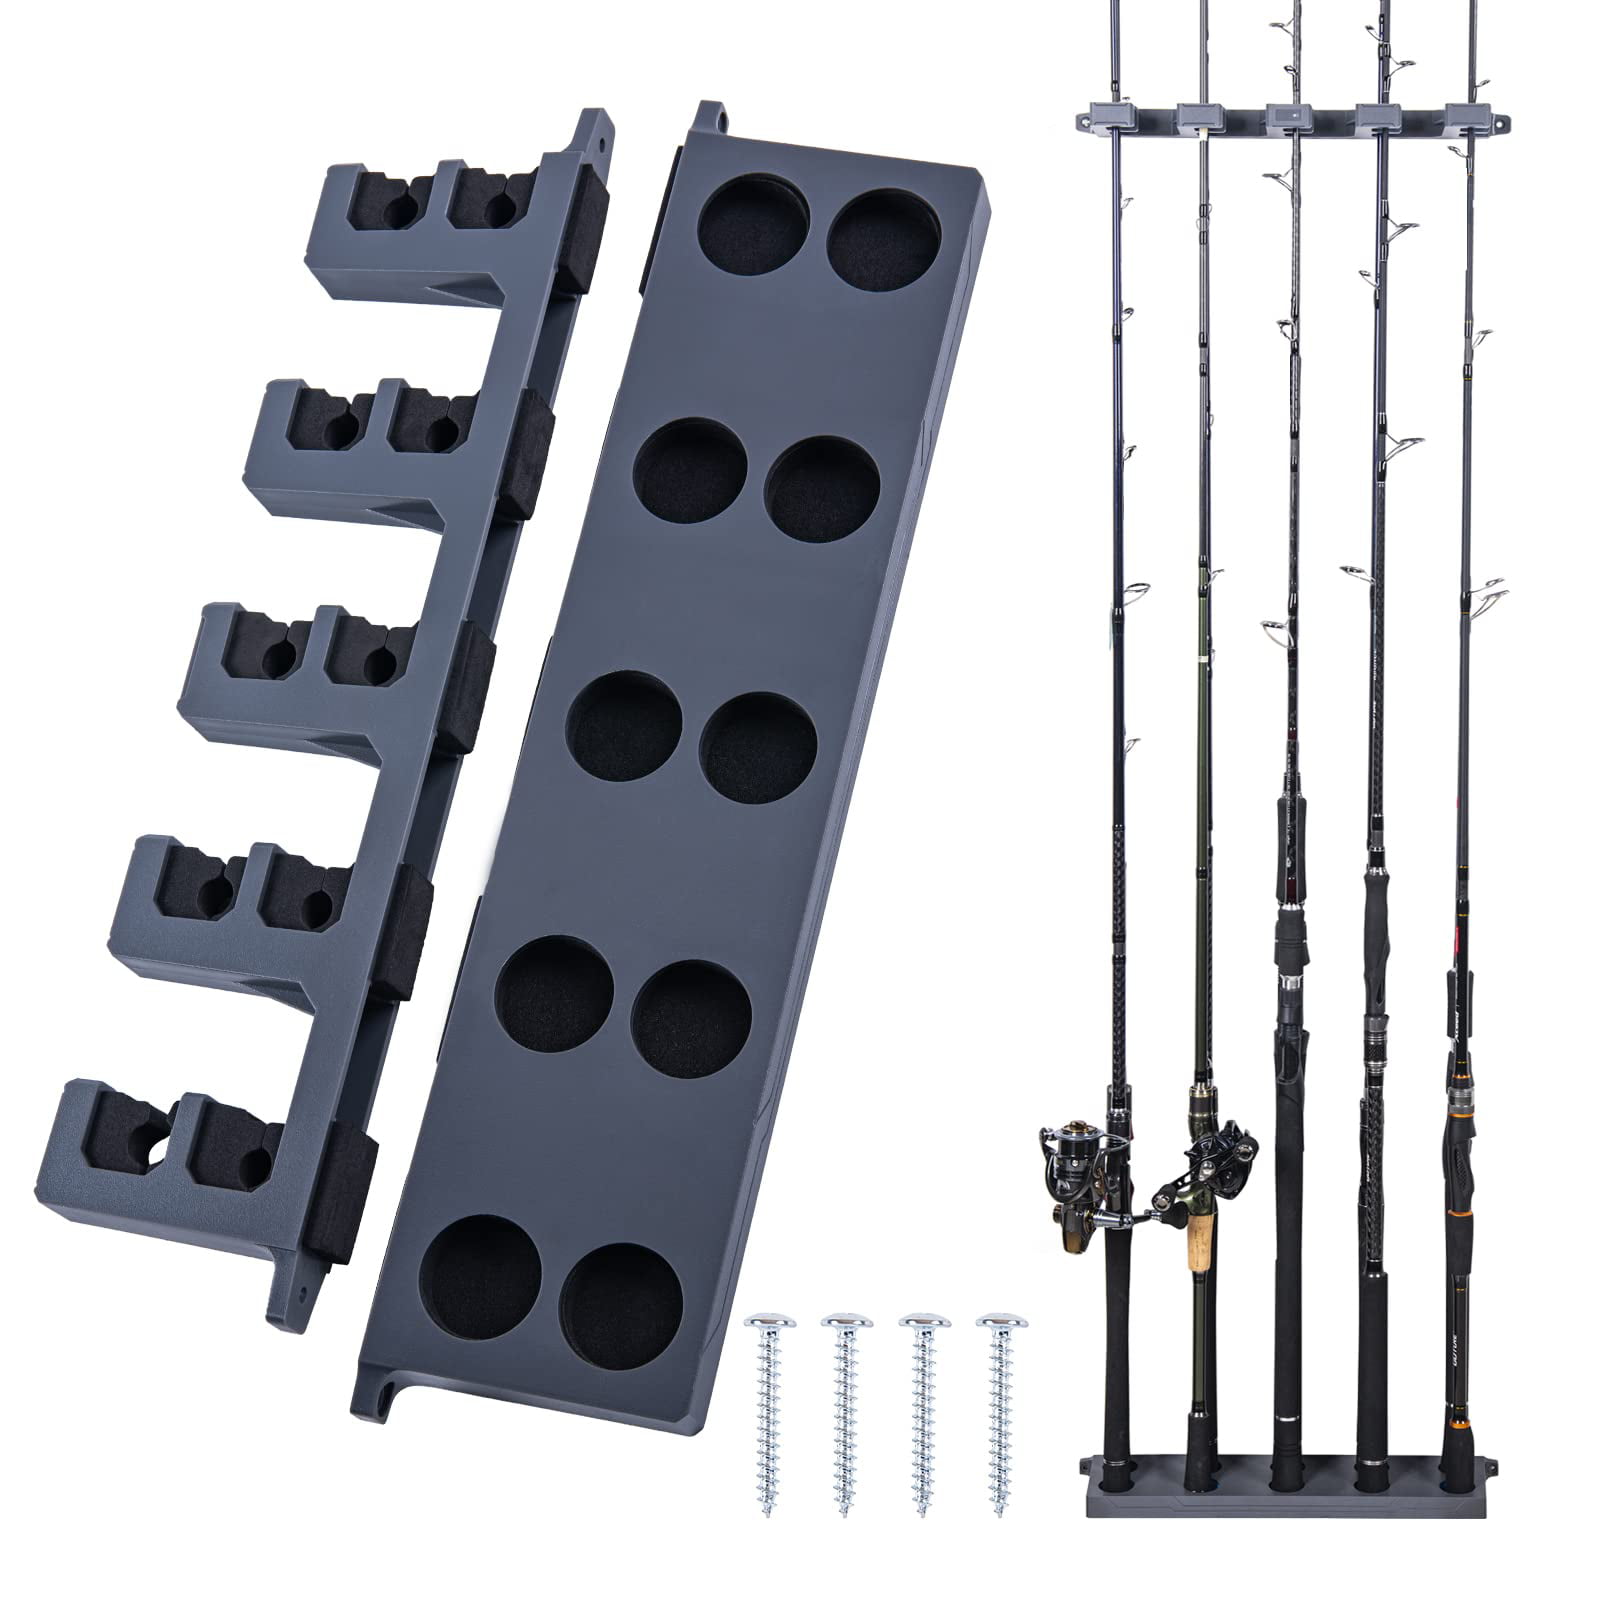 Goture Vertical Fishing Rod Holder, Wall Mounted Fishing Rod